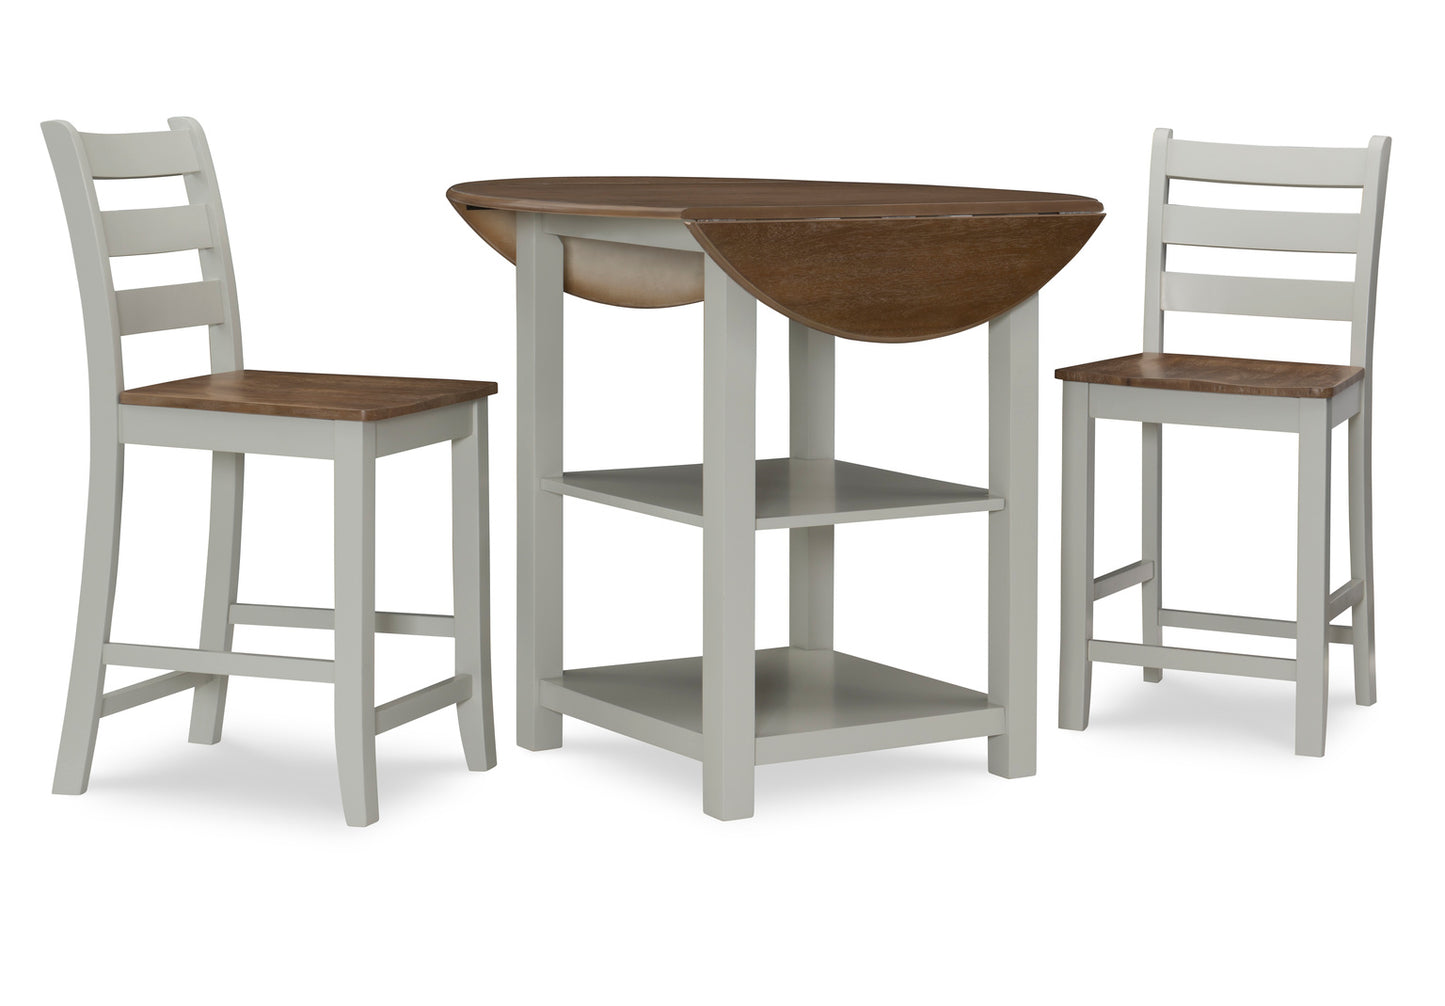 WEEKLY or MONTHLY. Abigail Gray Drop Leaf Pub Table & 2 Pub Chairs